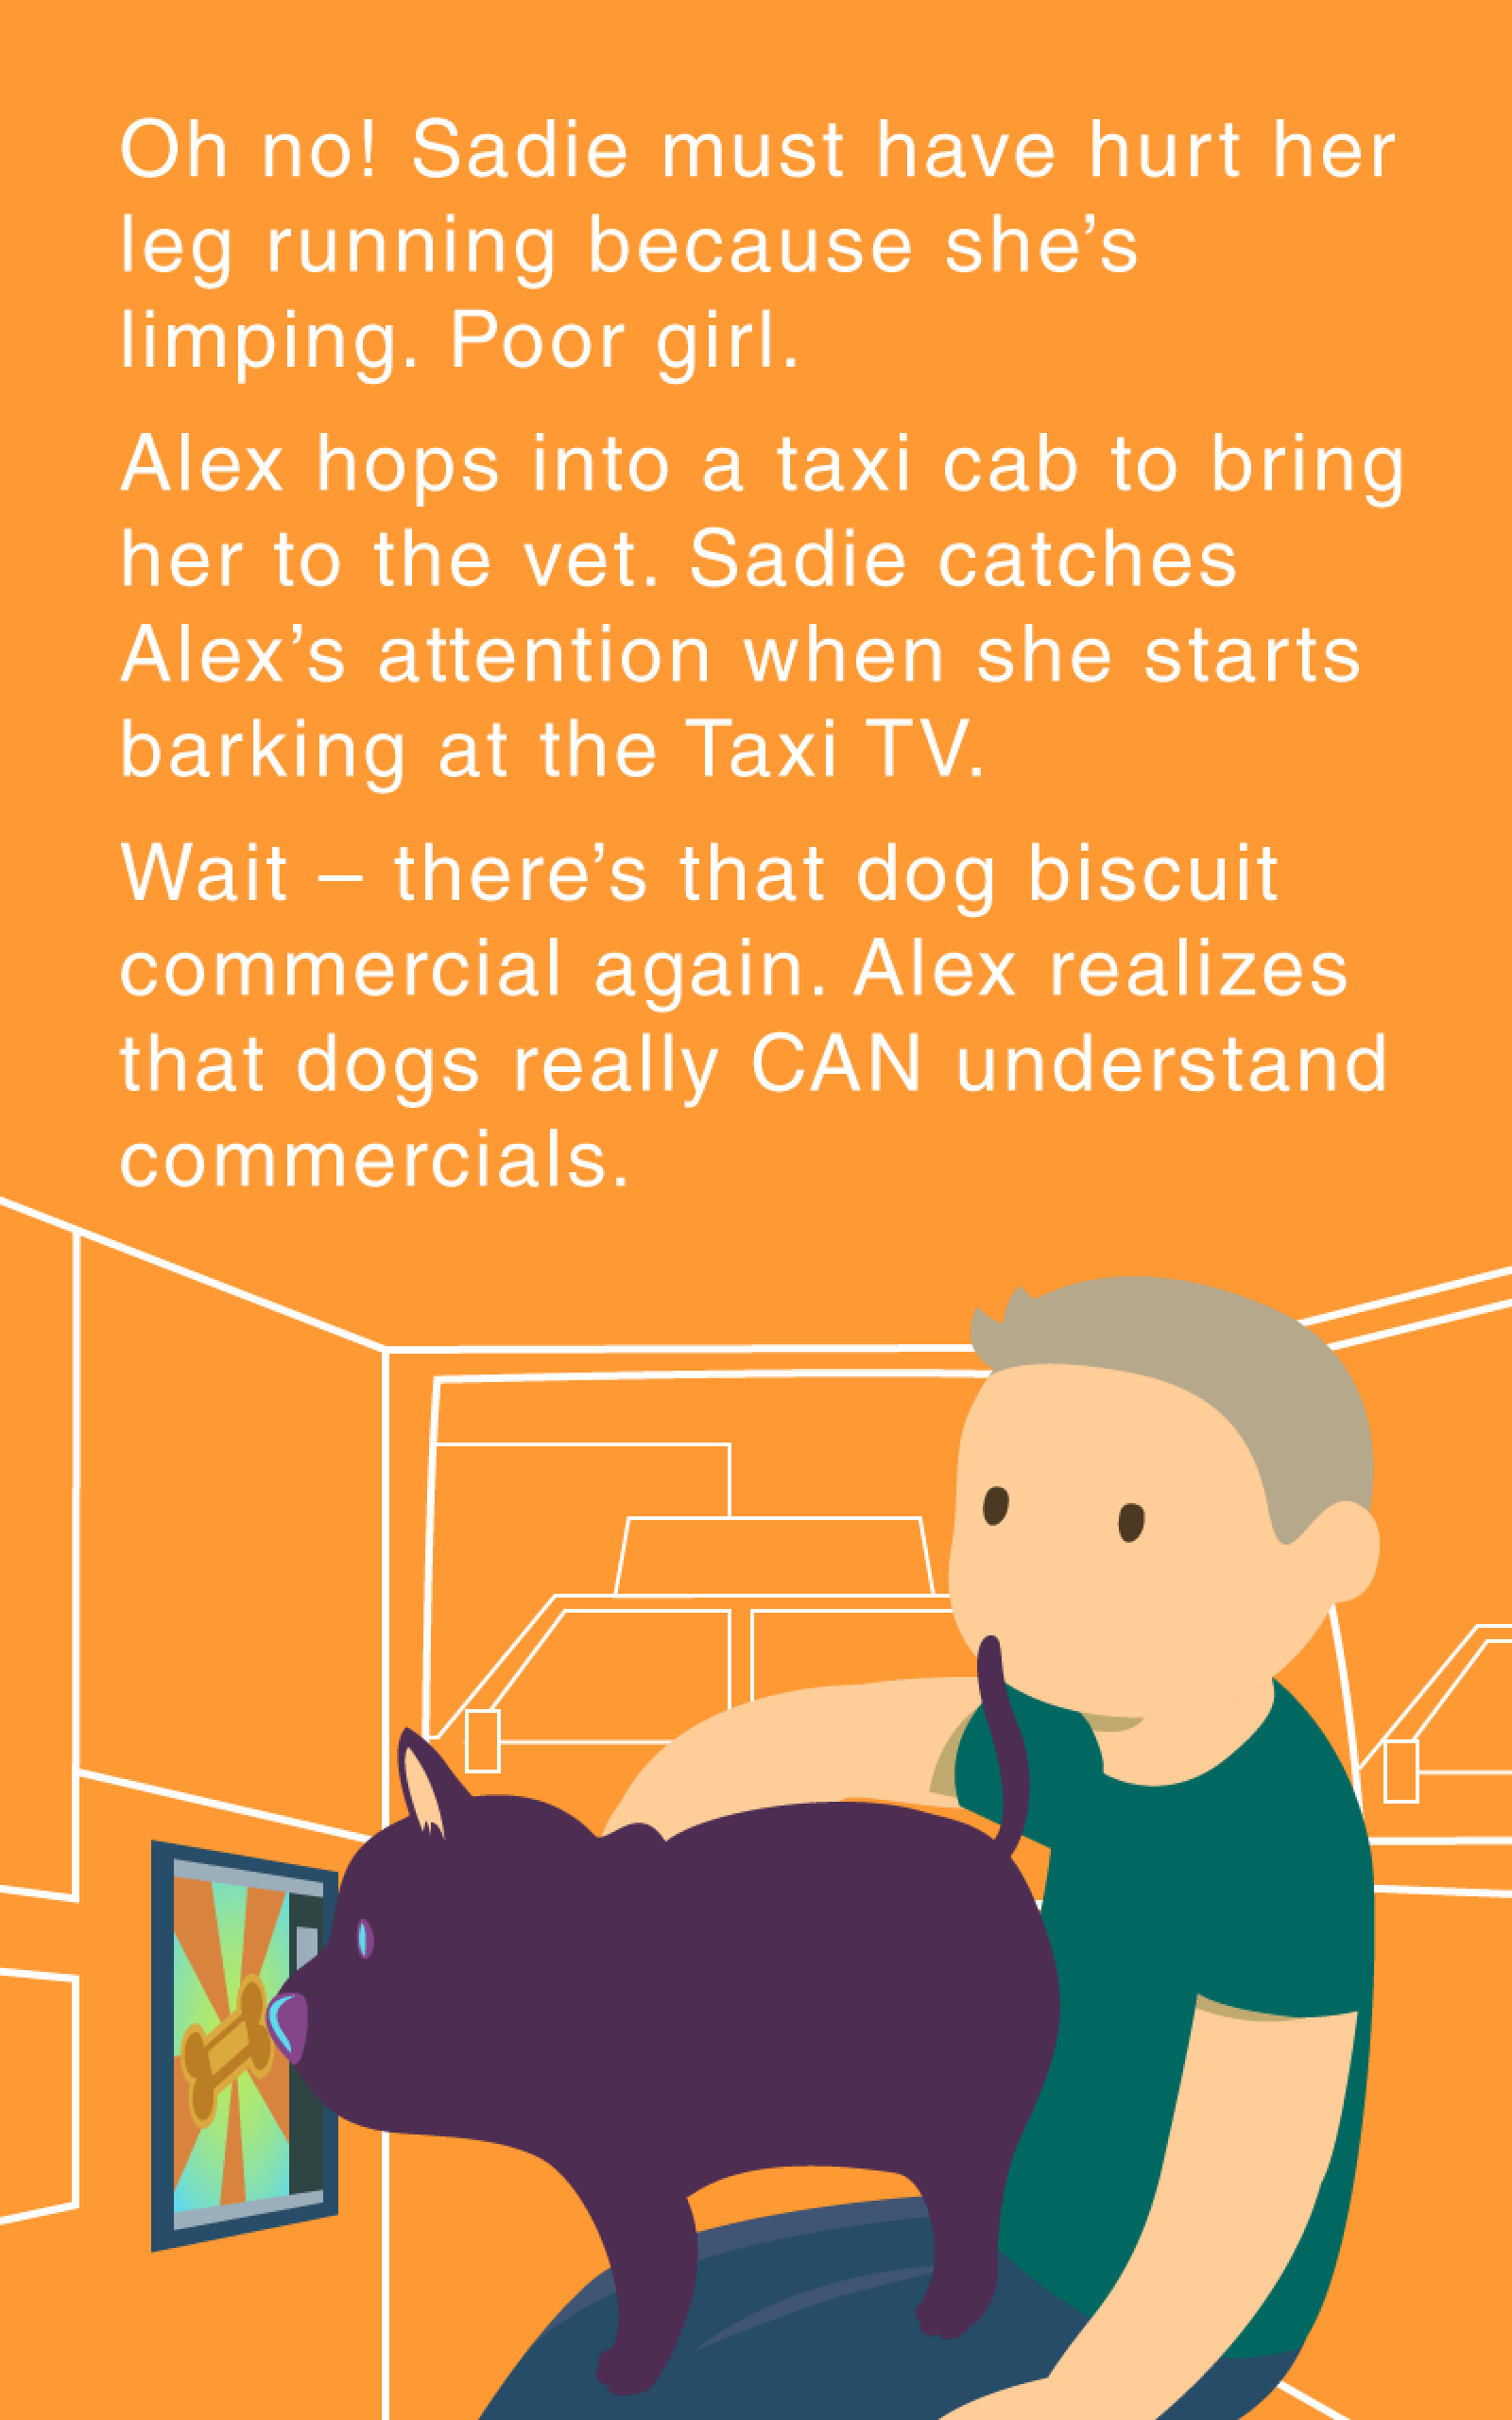 Man and dog in cab on way vet, watching ad